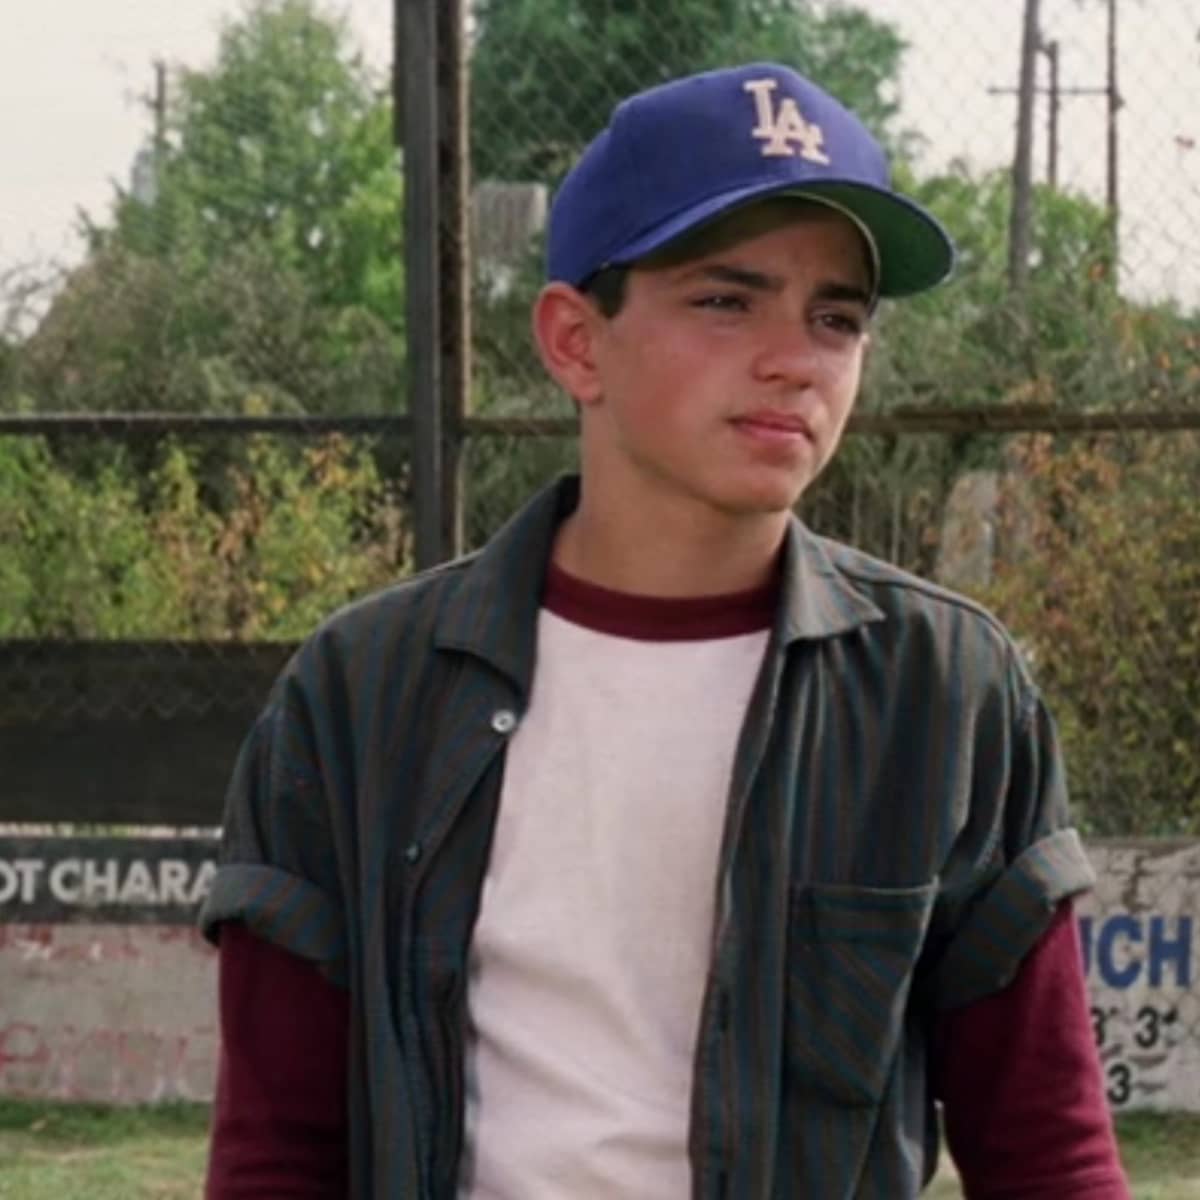 MLB The Show: Benny The Jet Rodriguez - Hollywood Franchise